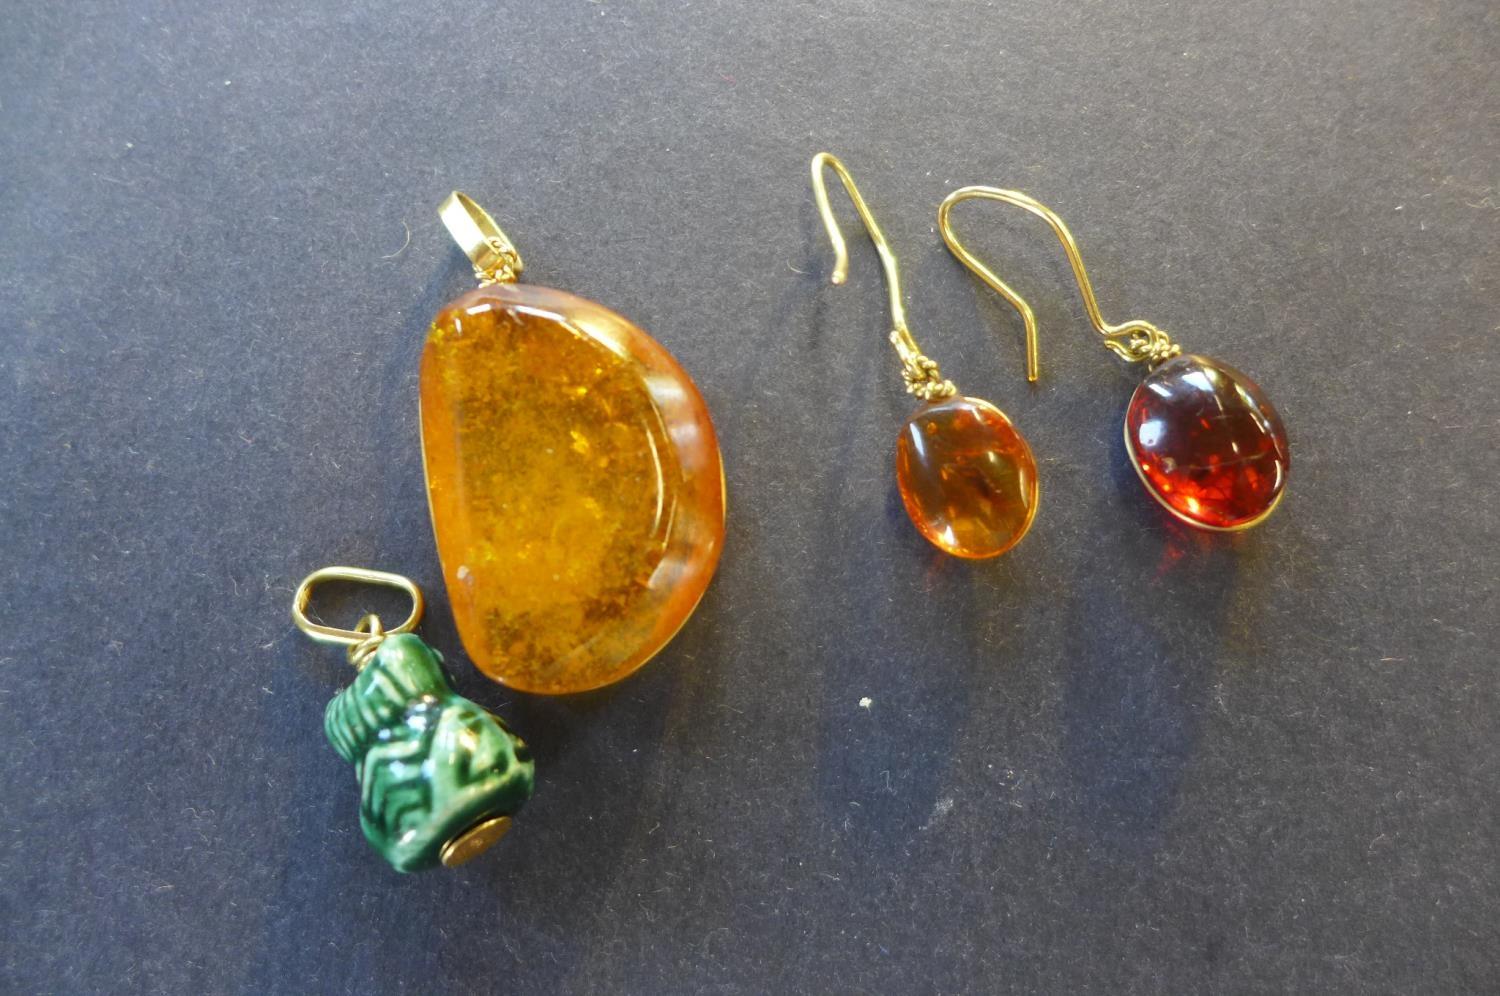 A polished amber pendant, measuring 30mm x 20mm x 9mm with yellow metal mount and pair of similar